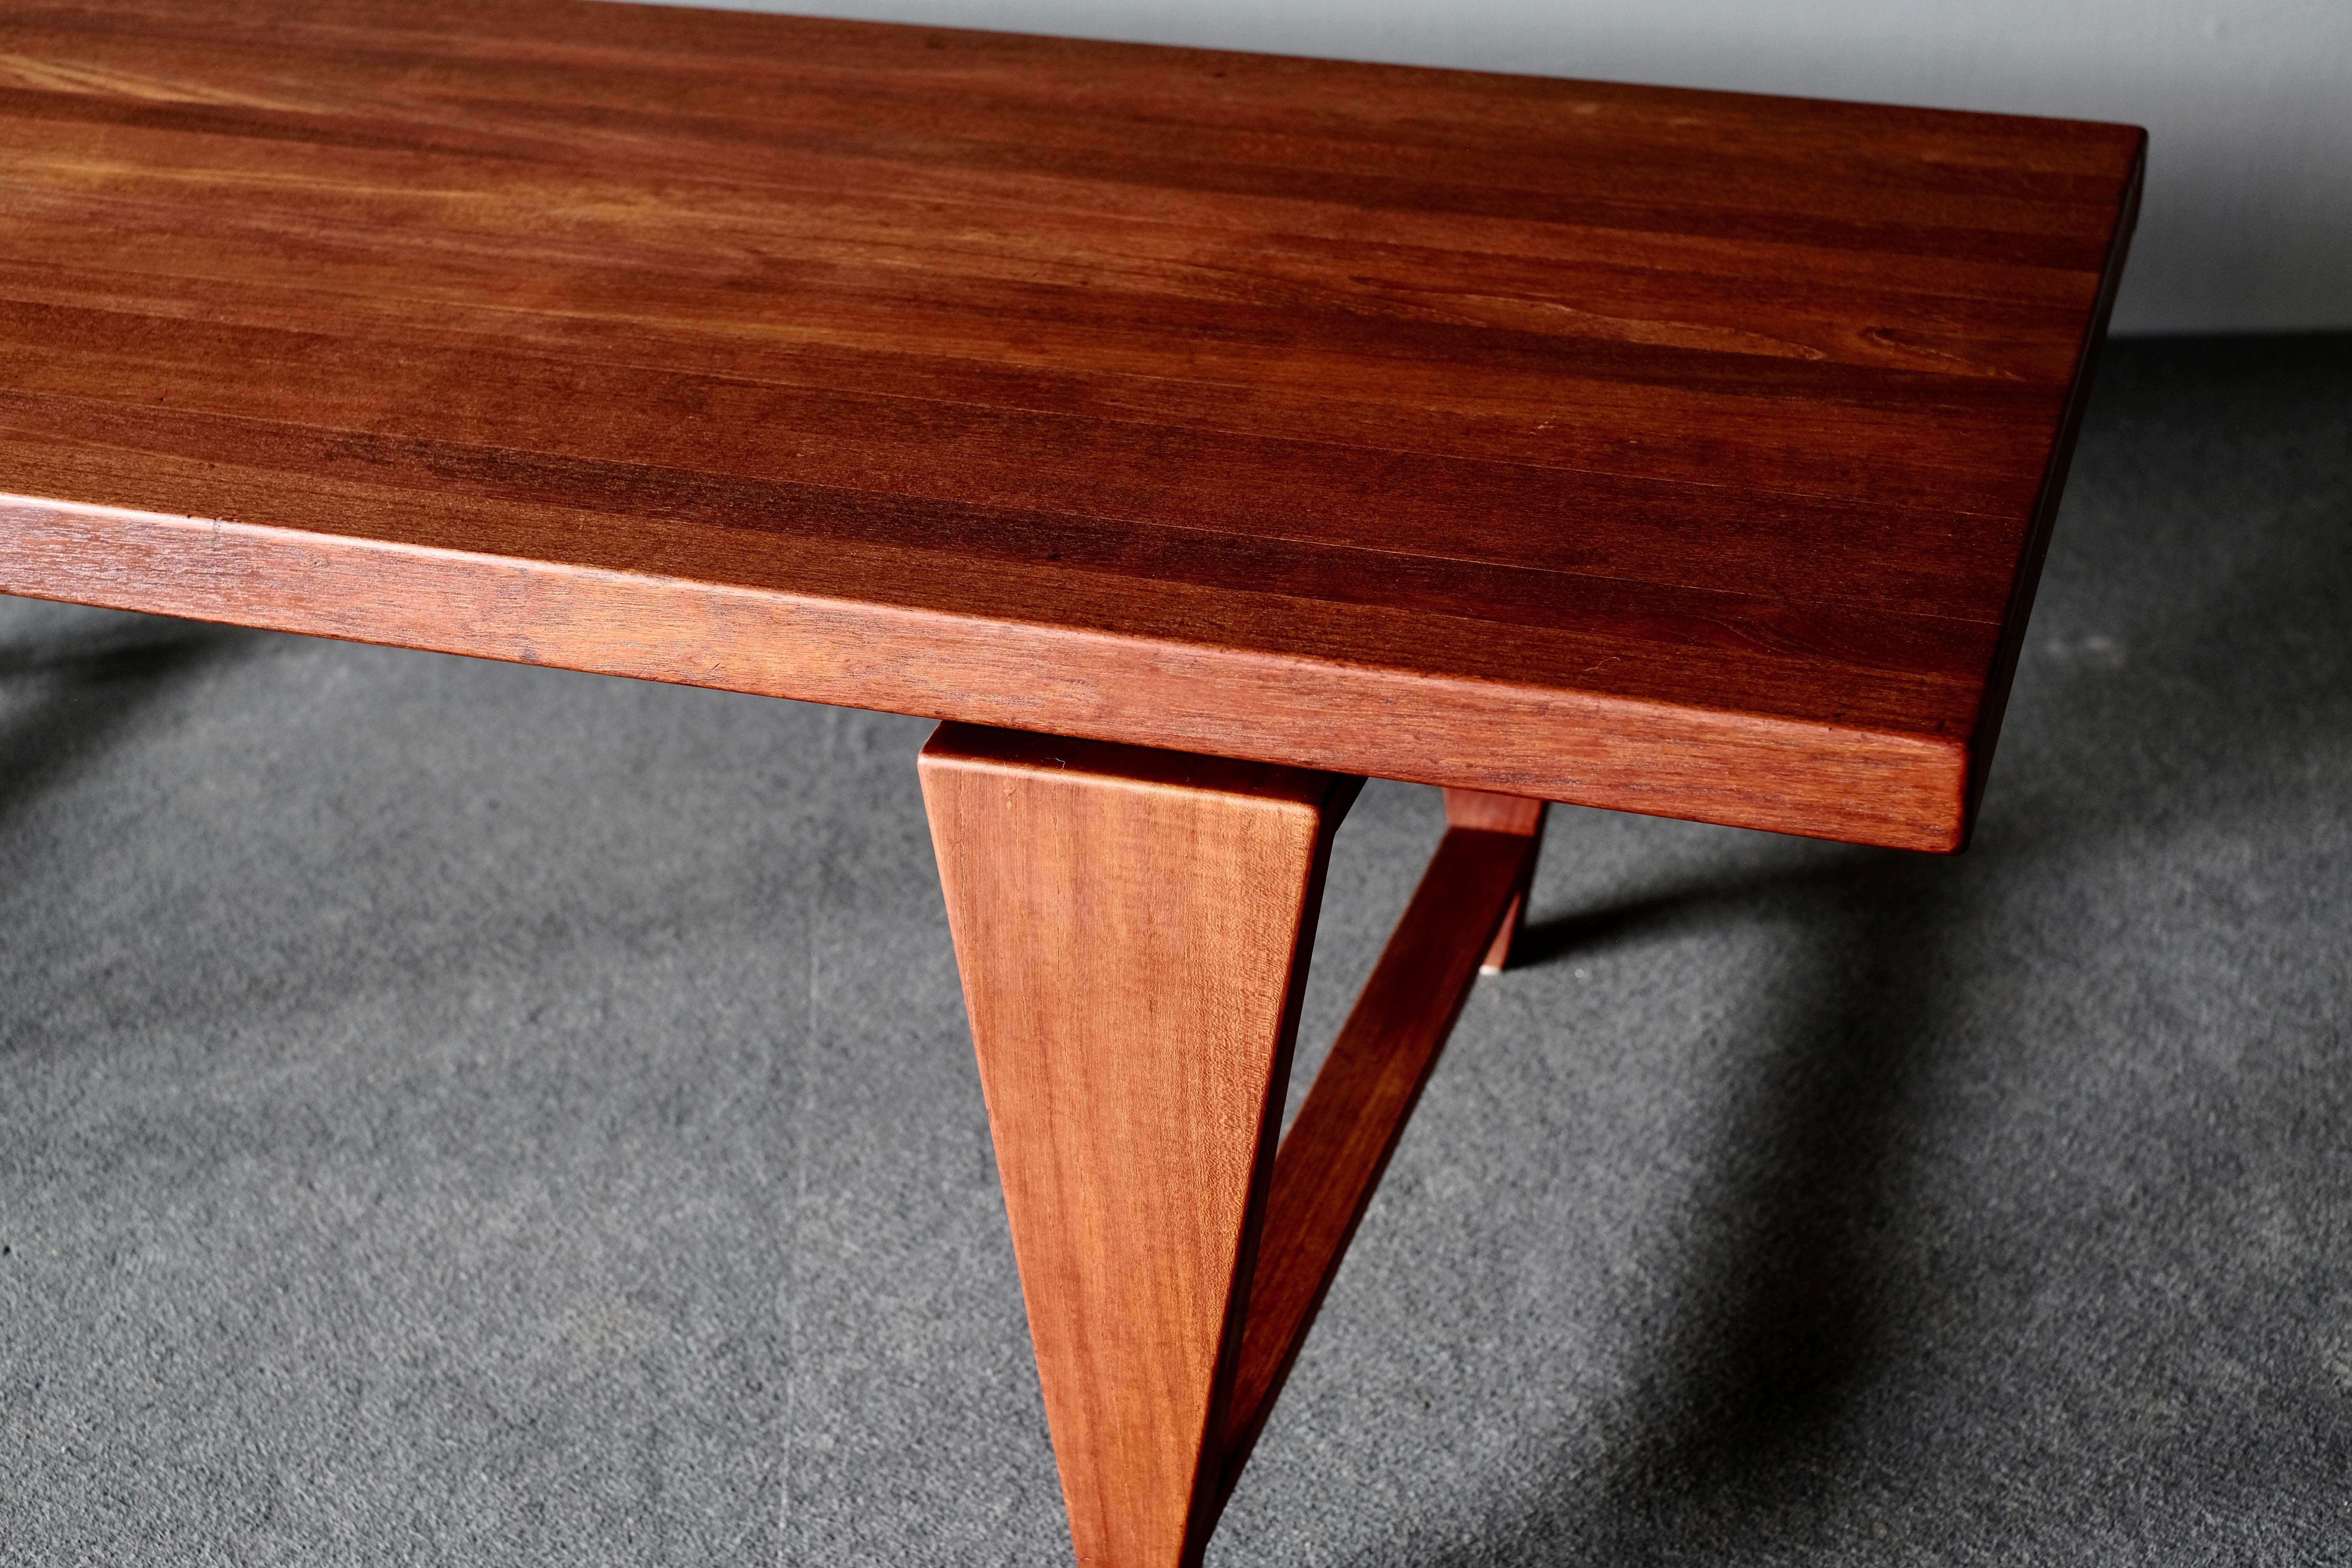 Coffee table by Illum Wikkelsø, manufactured by Mikael Laursen. This is in solid beautifully patinated teak and has the signature Wikkelsø inverted pyramid legs. The unusual details make the tabletop look like its hovering above its base.